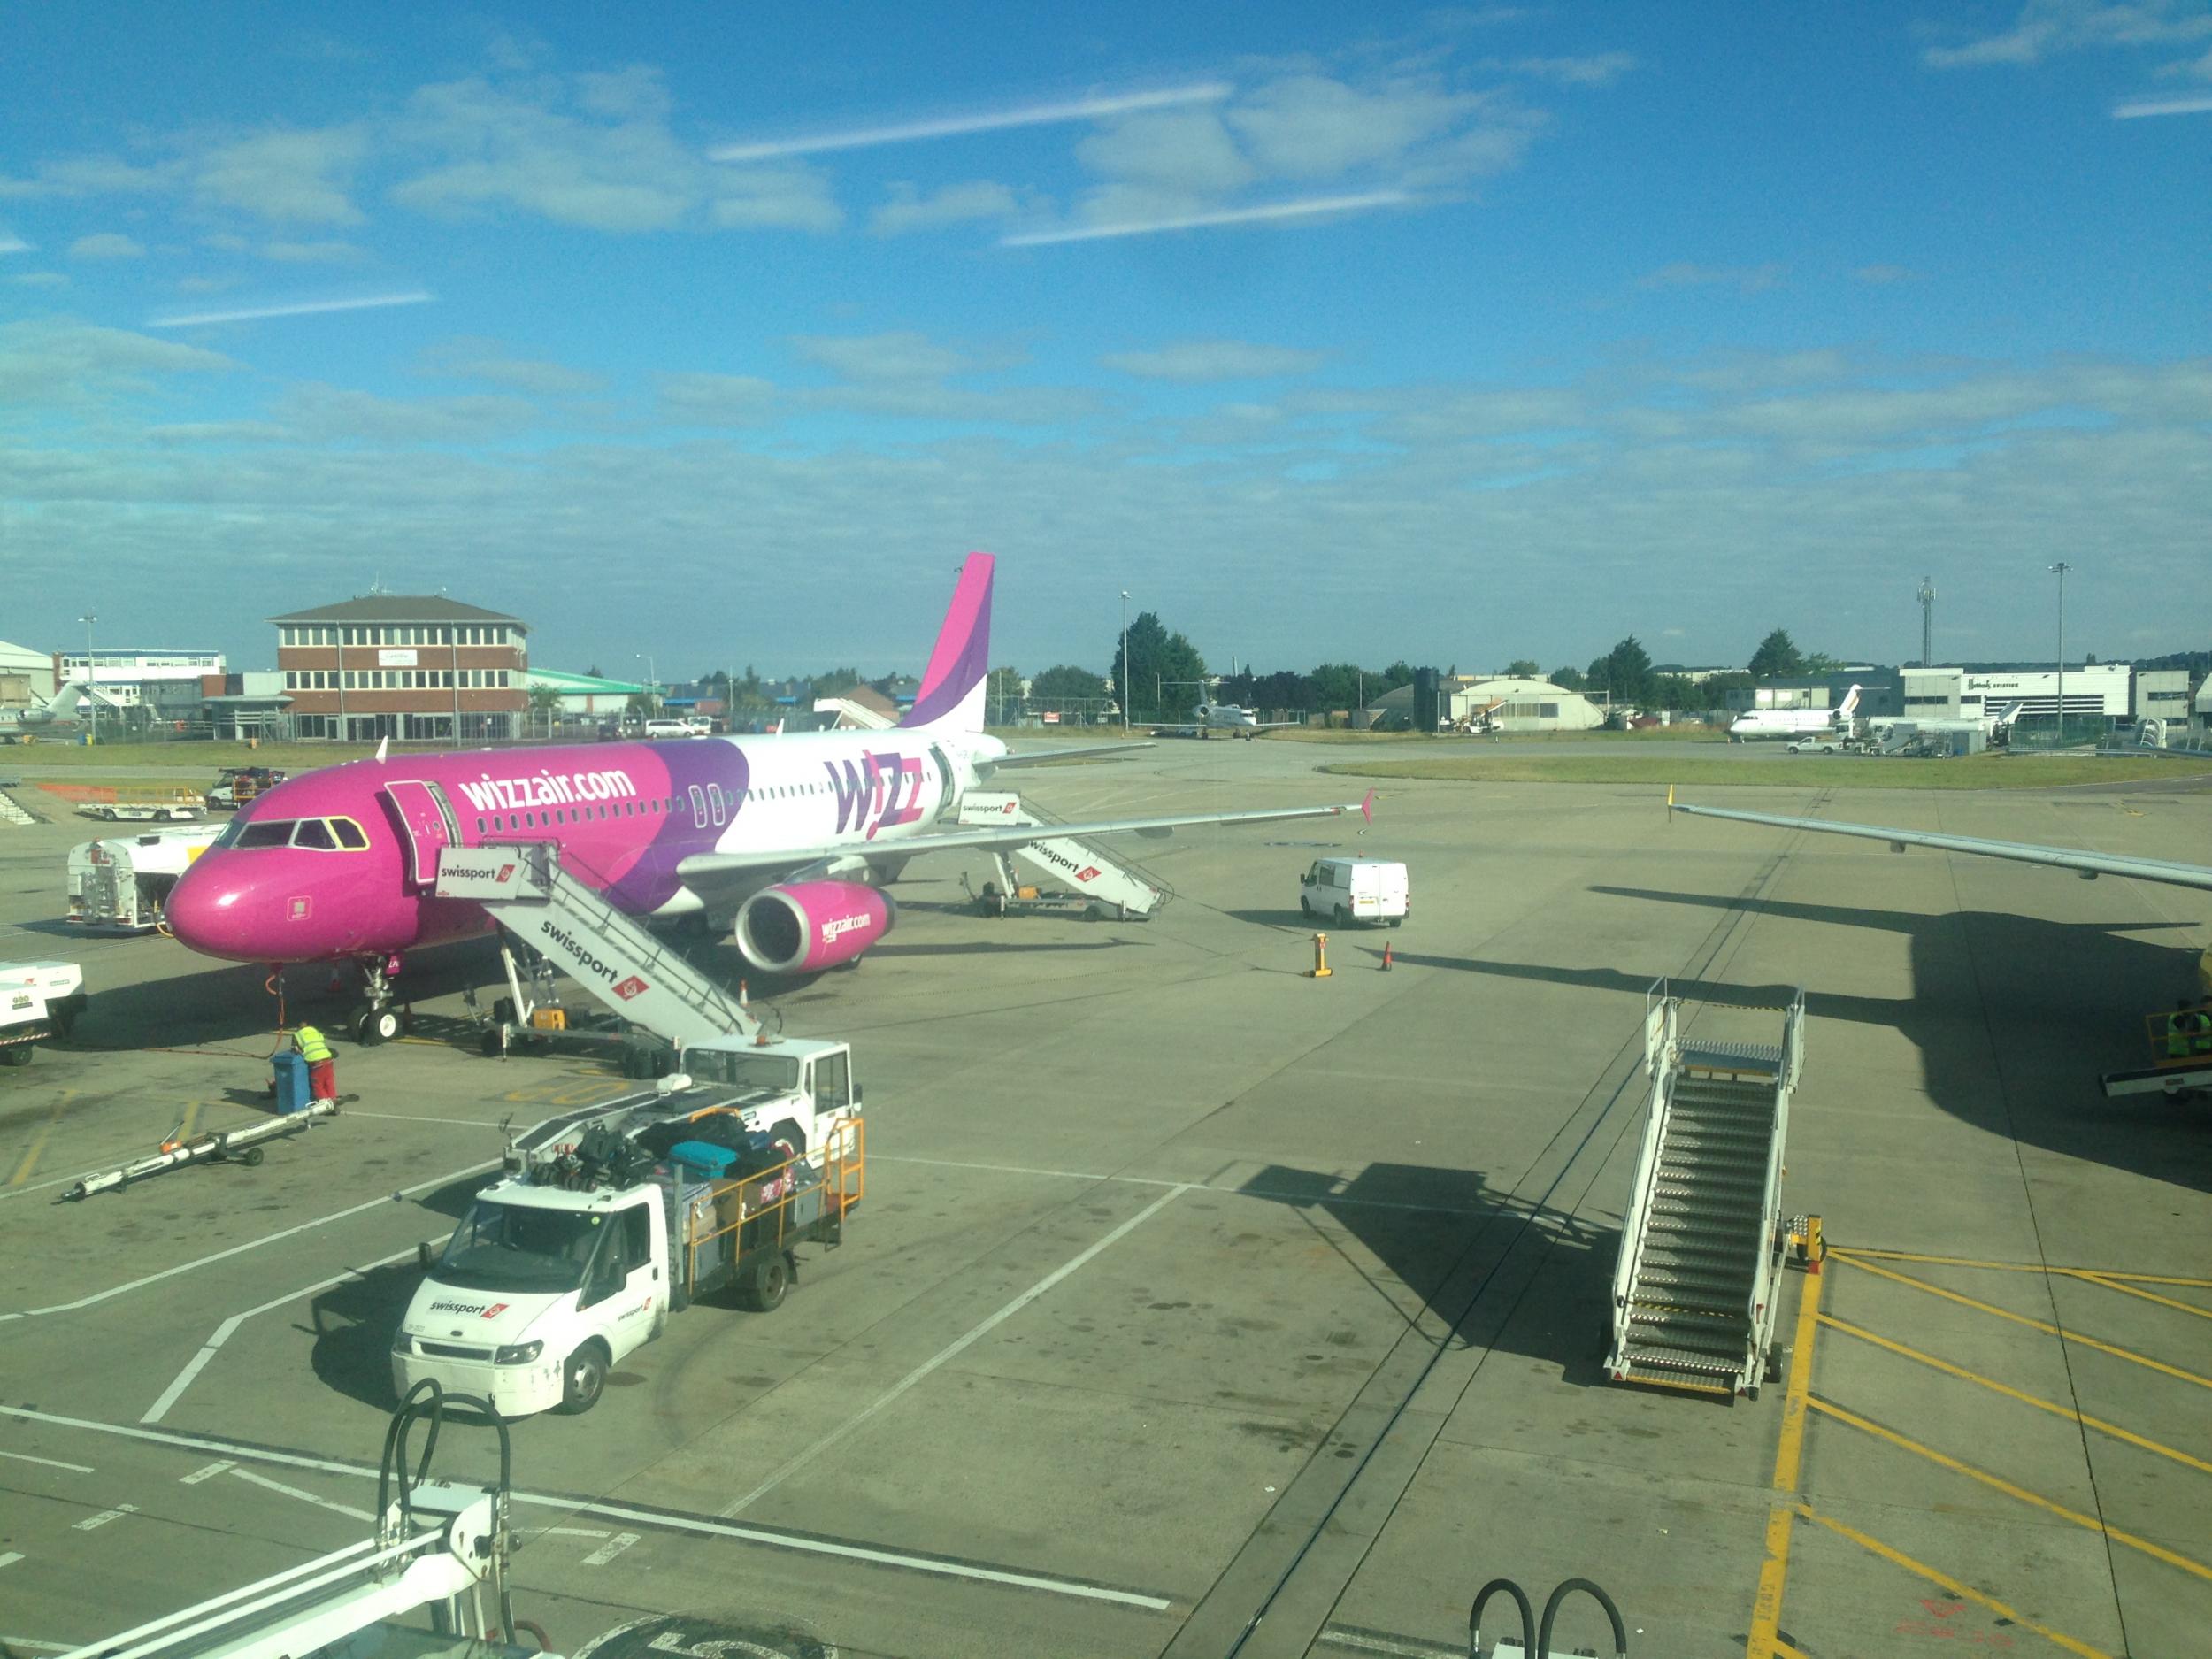 All aboard: Wizz Air Airbus jet at Luton Airport